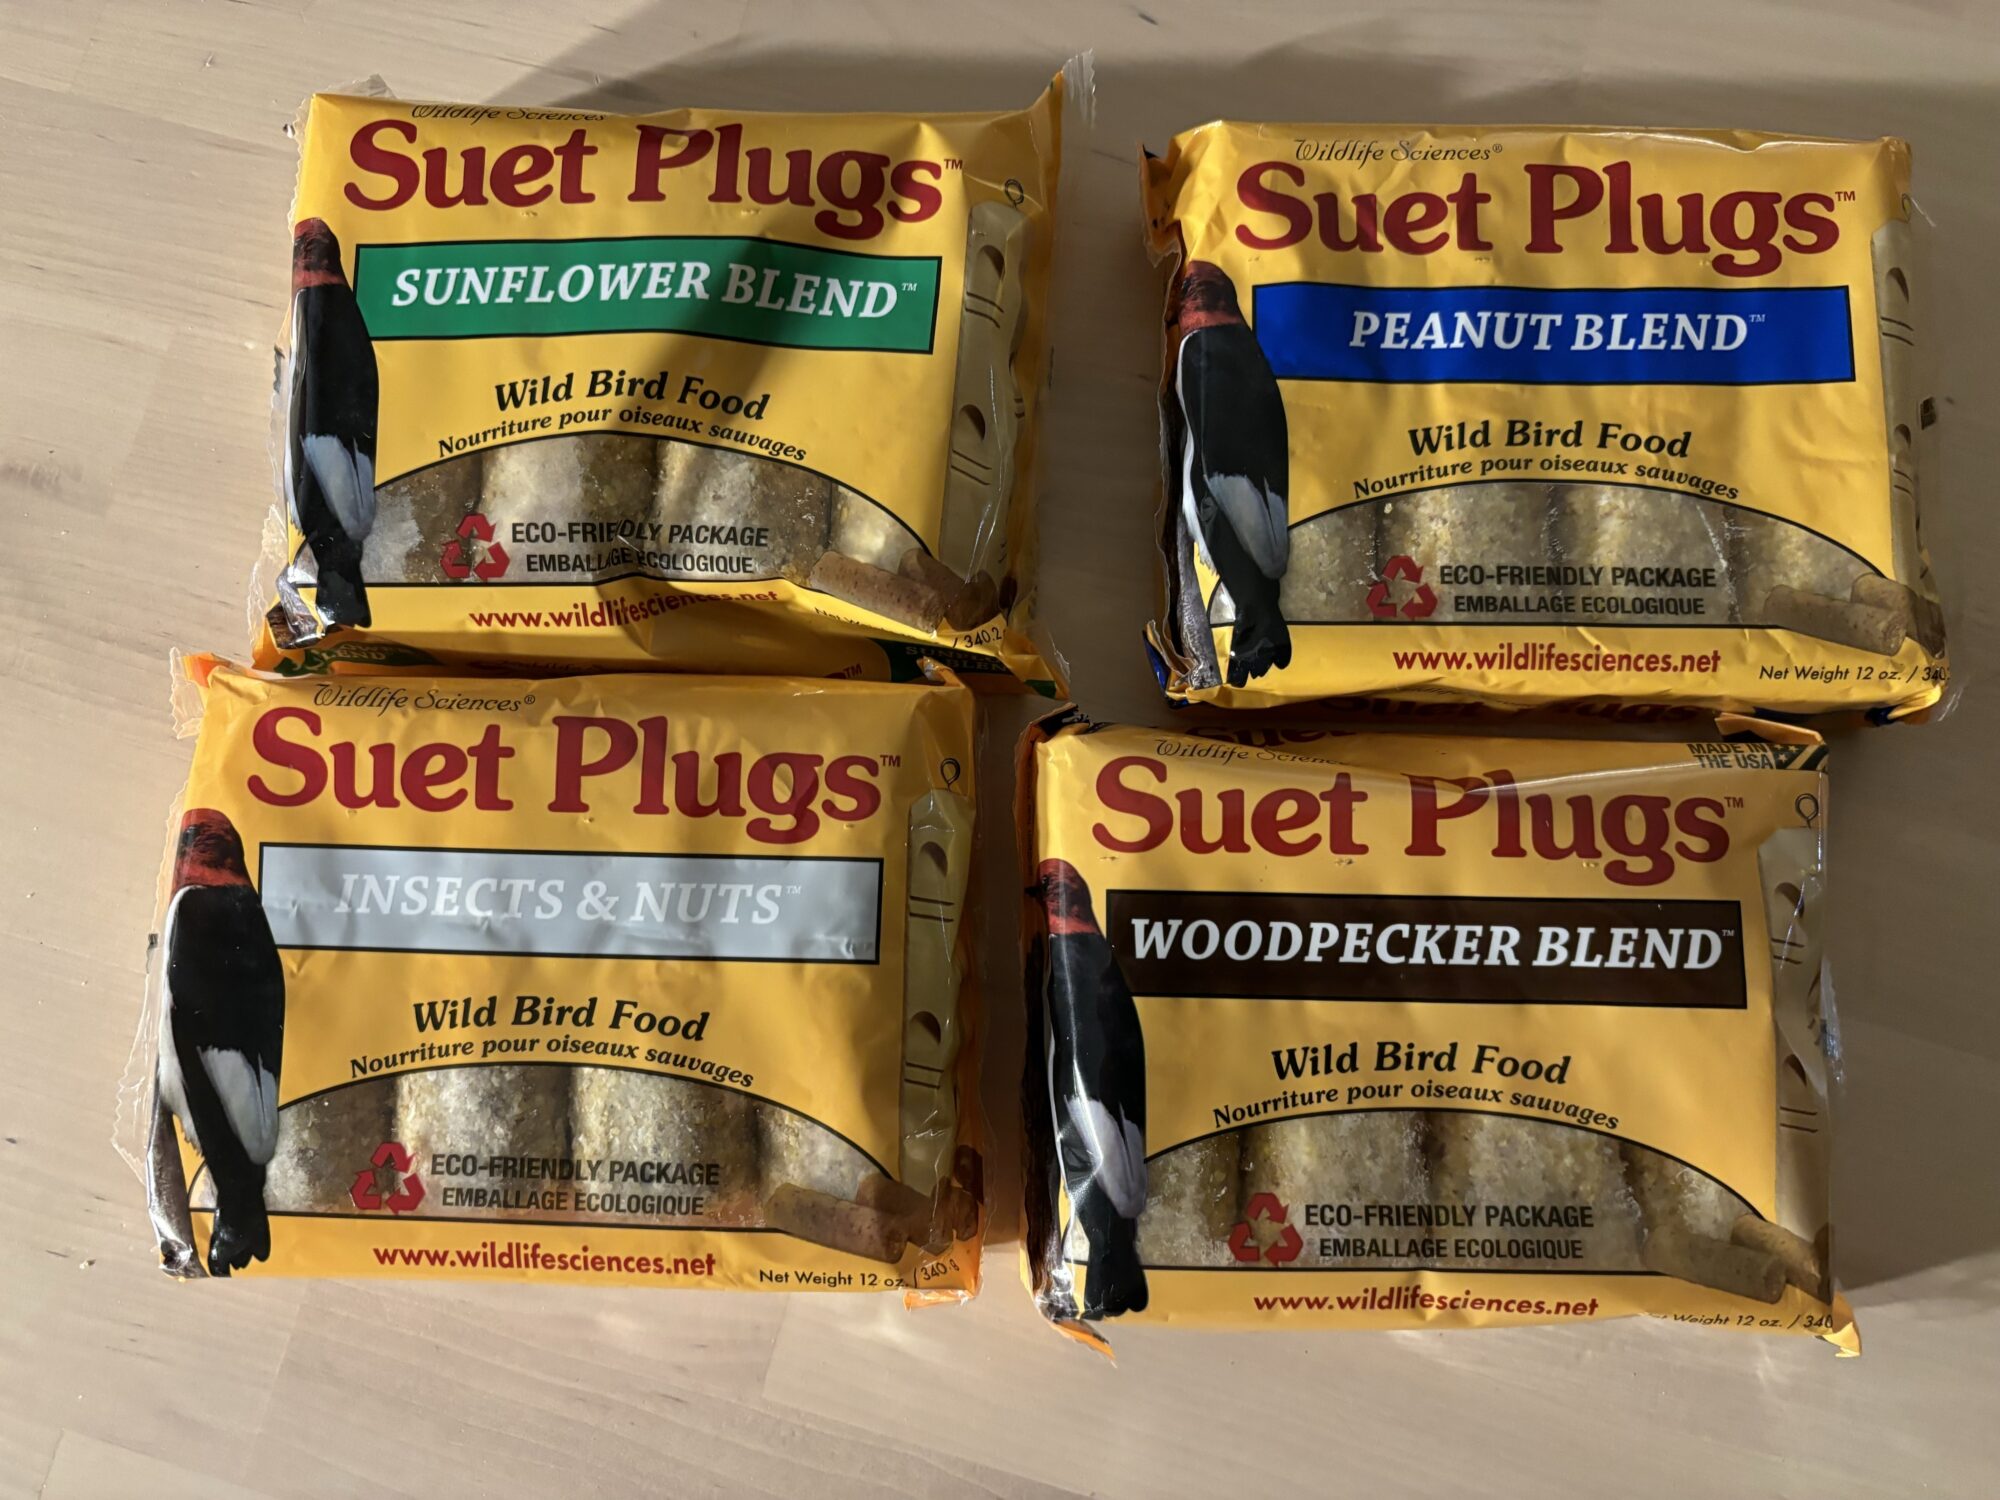 A variety pack of suet plugs for bird feeding on a table.